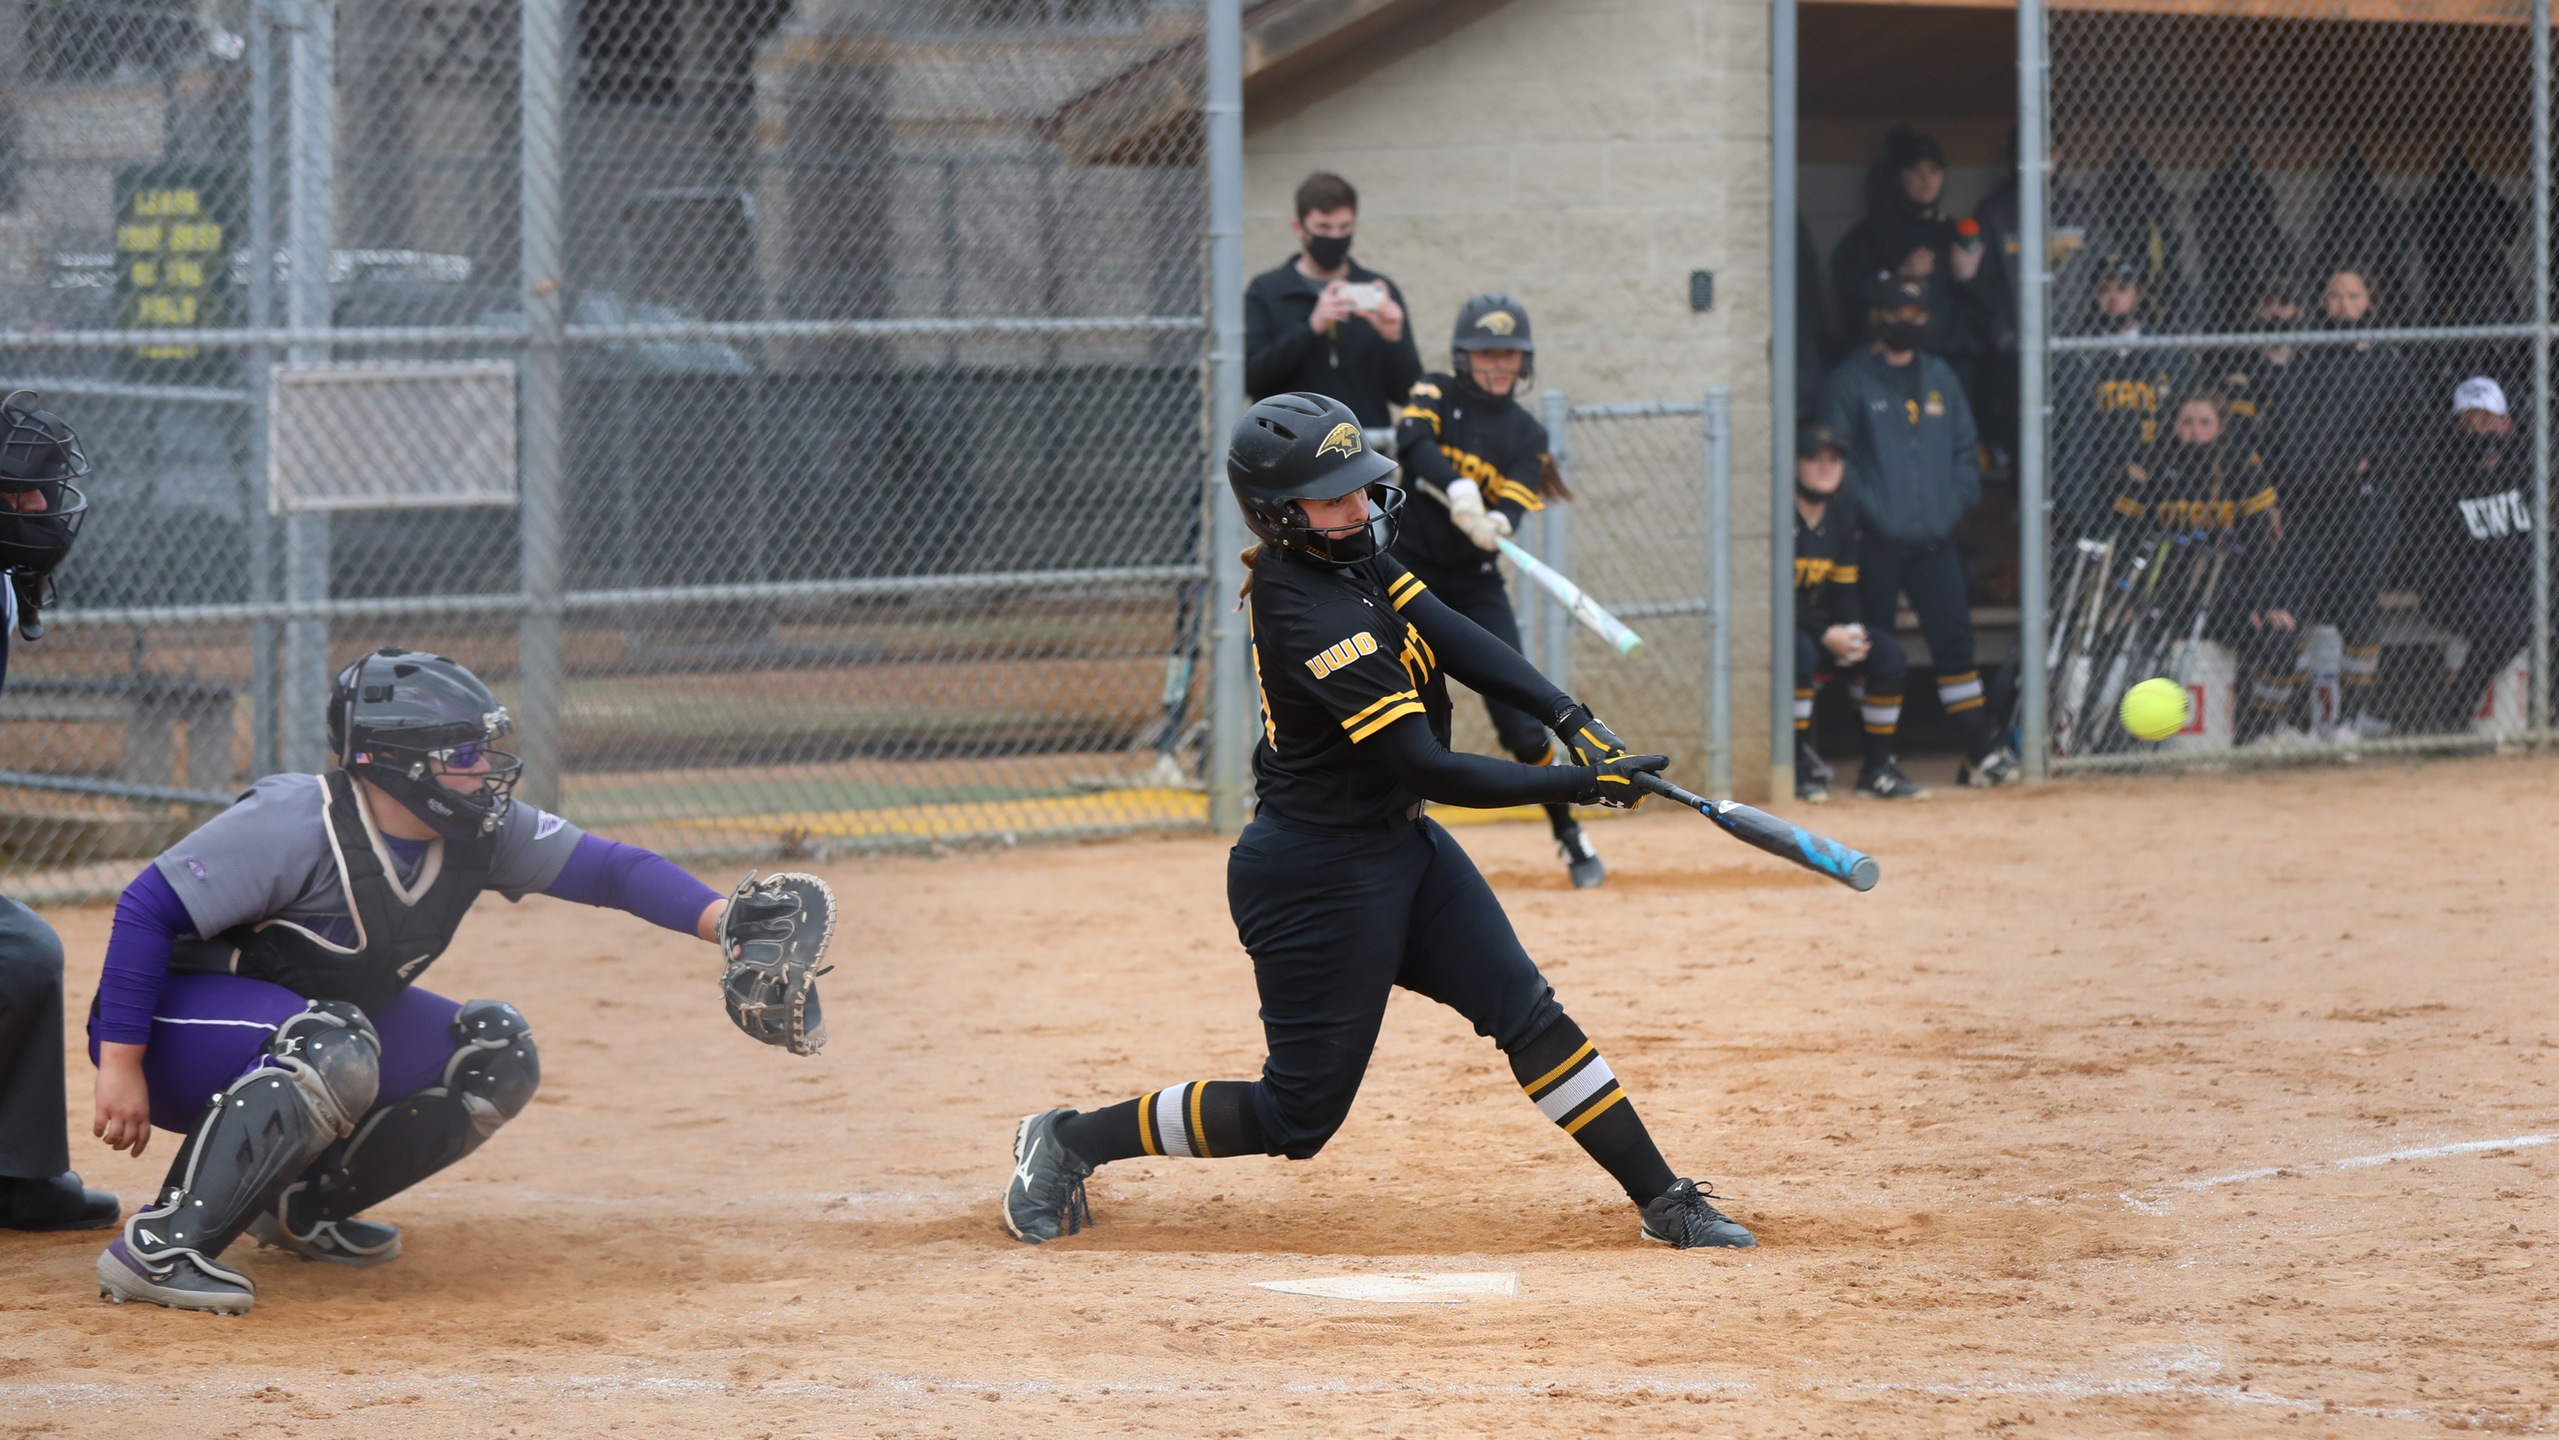 Amanda Mc Ilhany hit a two-run triple and scored the winning run during the seventh inning of the first game.